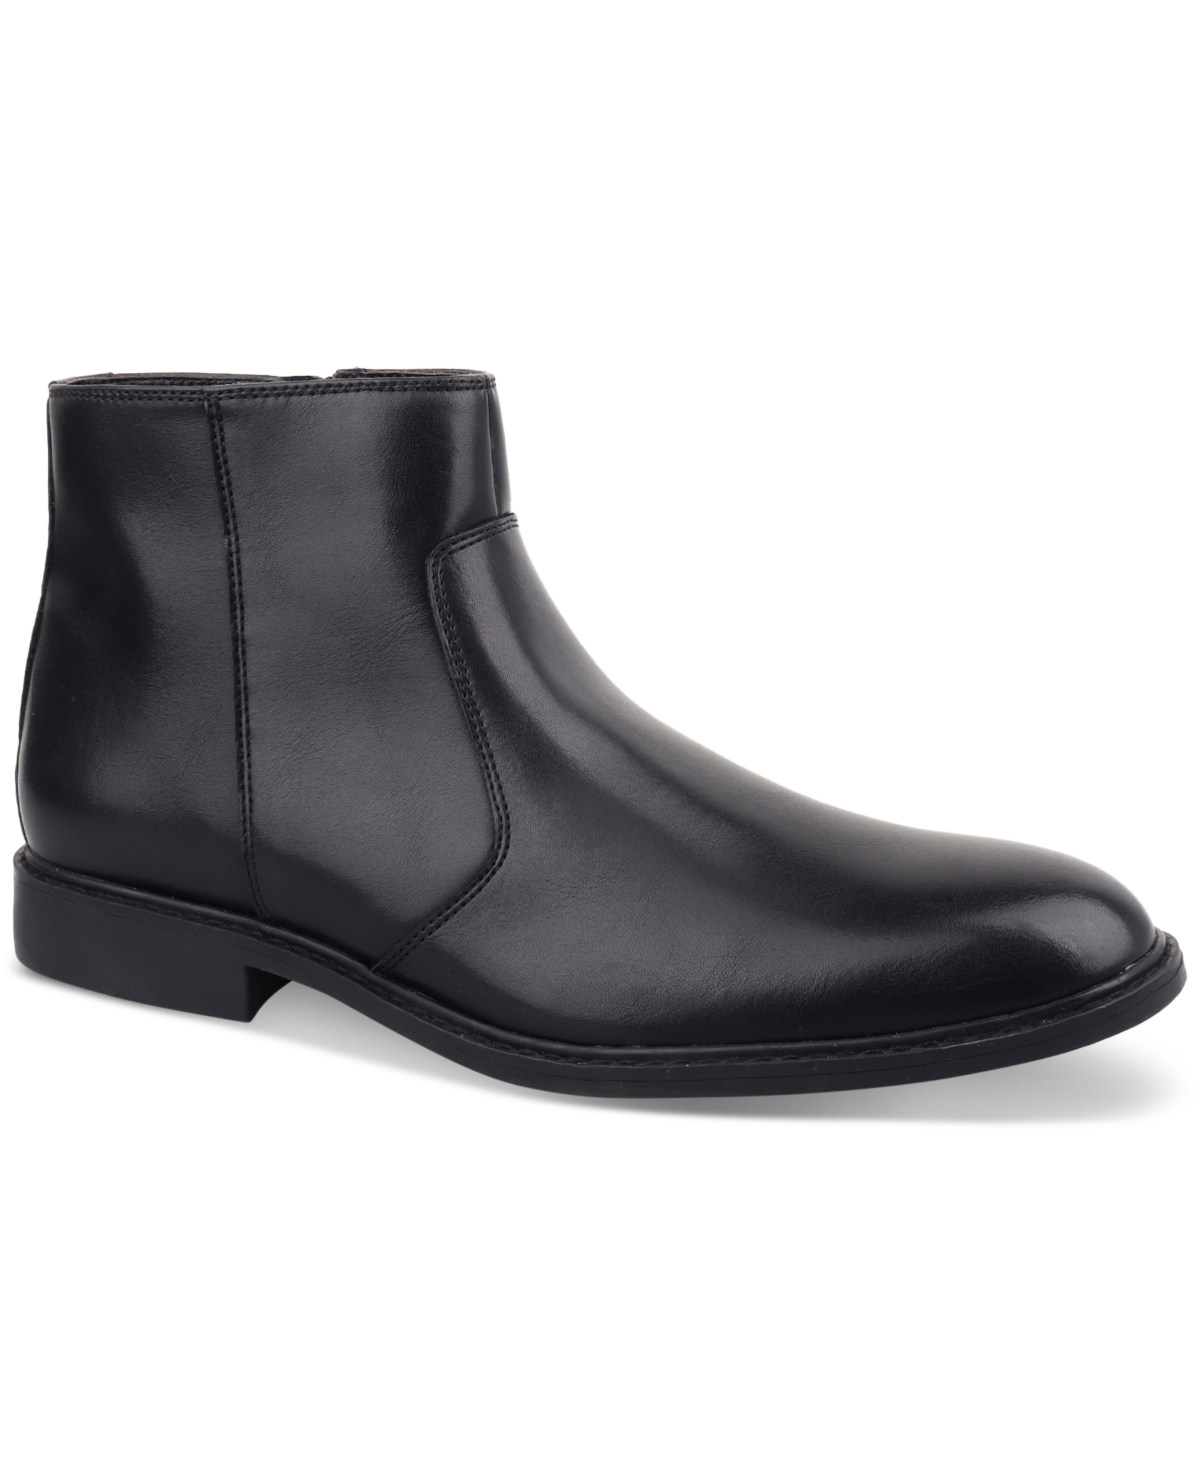 Men's Liam Side-Zip Boots, Created for Macy's - Black